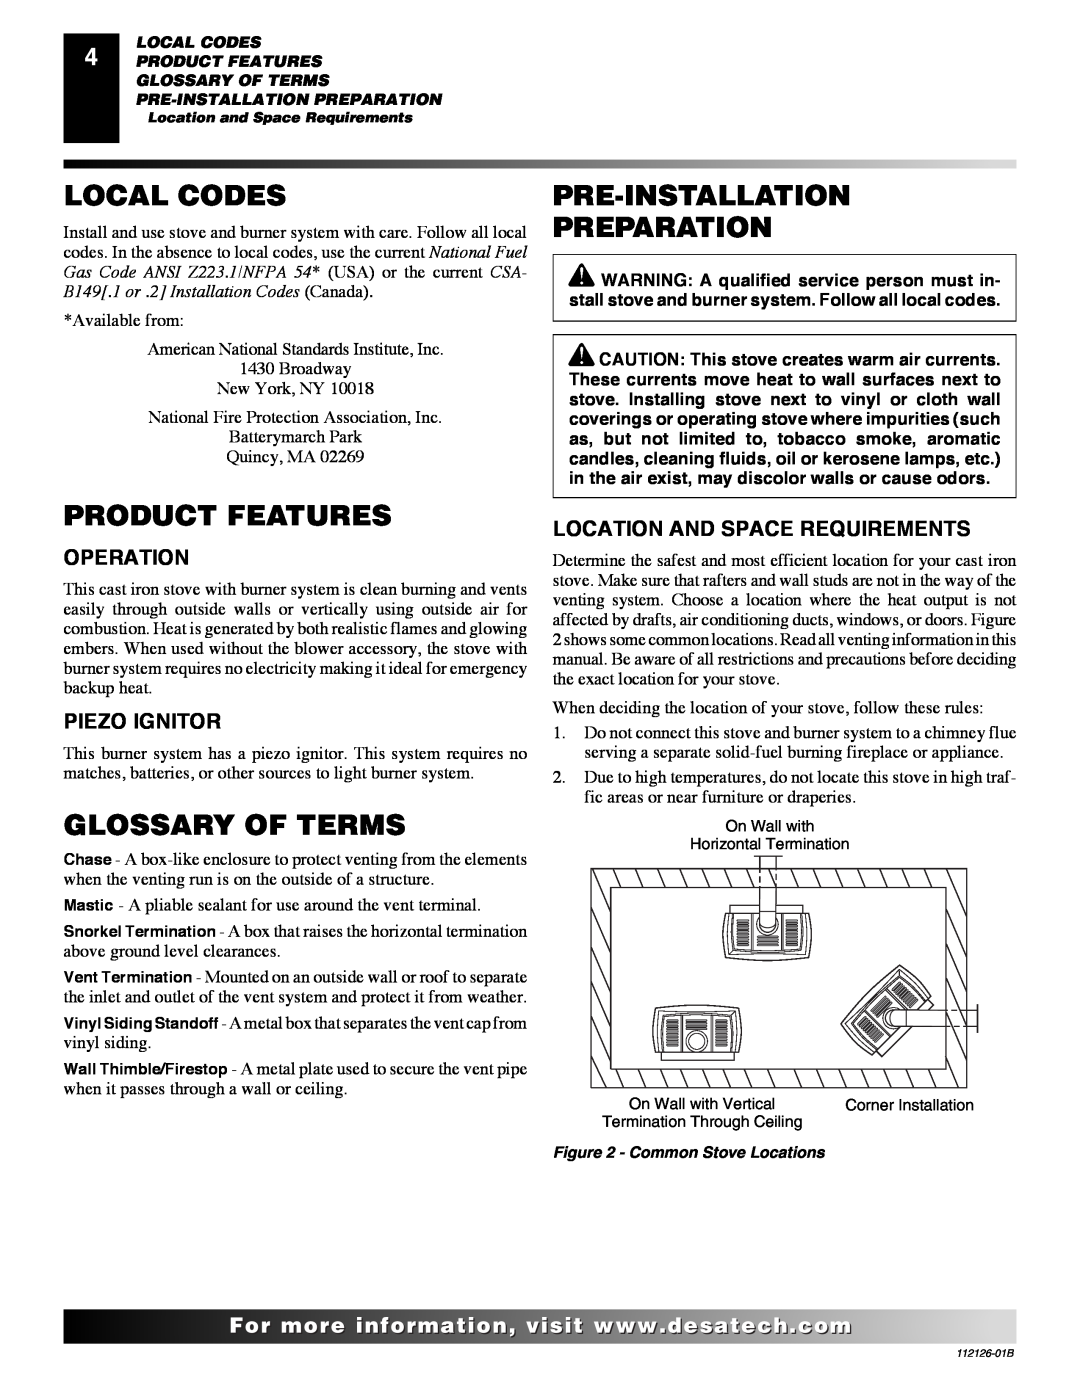 Desa SDVBND Local Codes, Pre-Installation Preparation, Product Features, Glossary Of Terms, Operation, Piezo Ignitor 